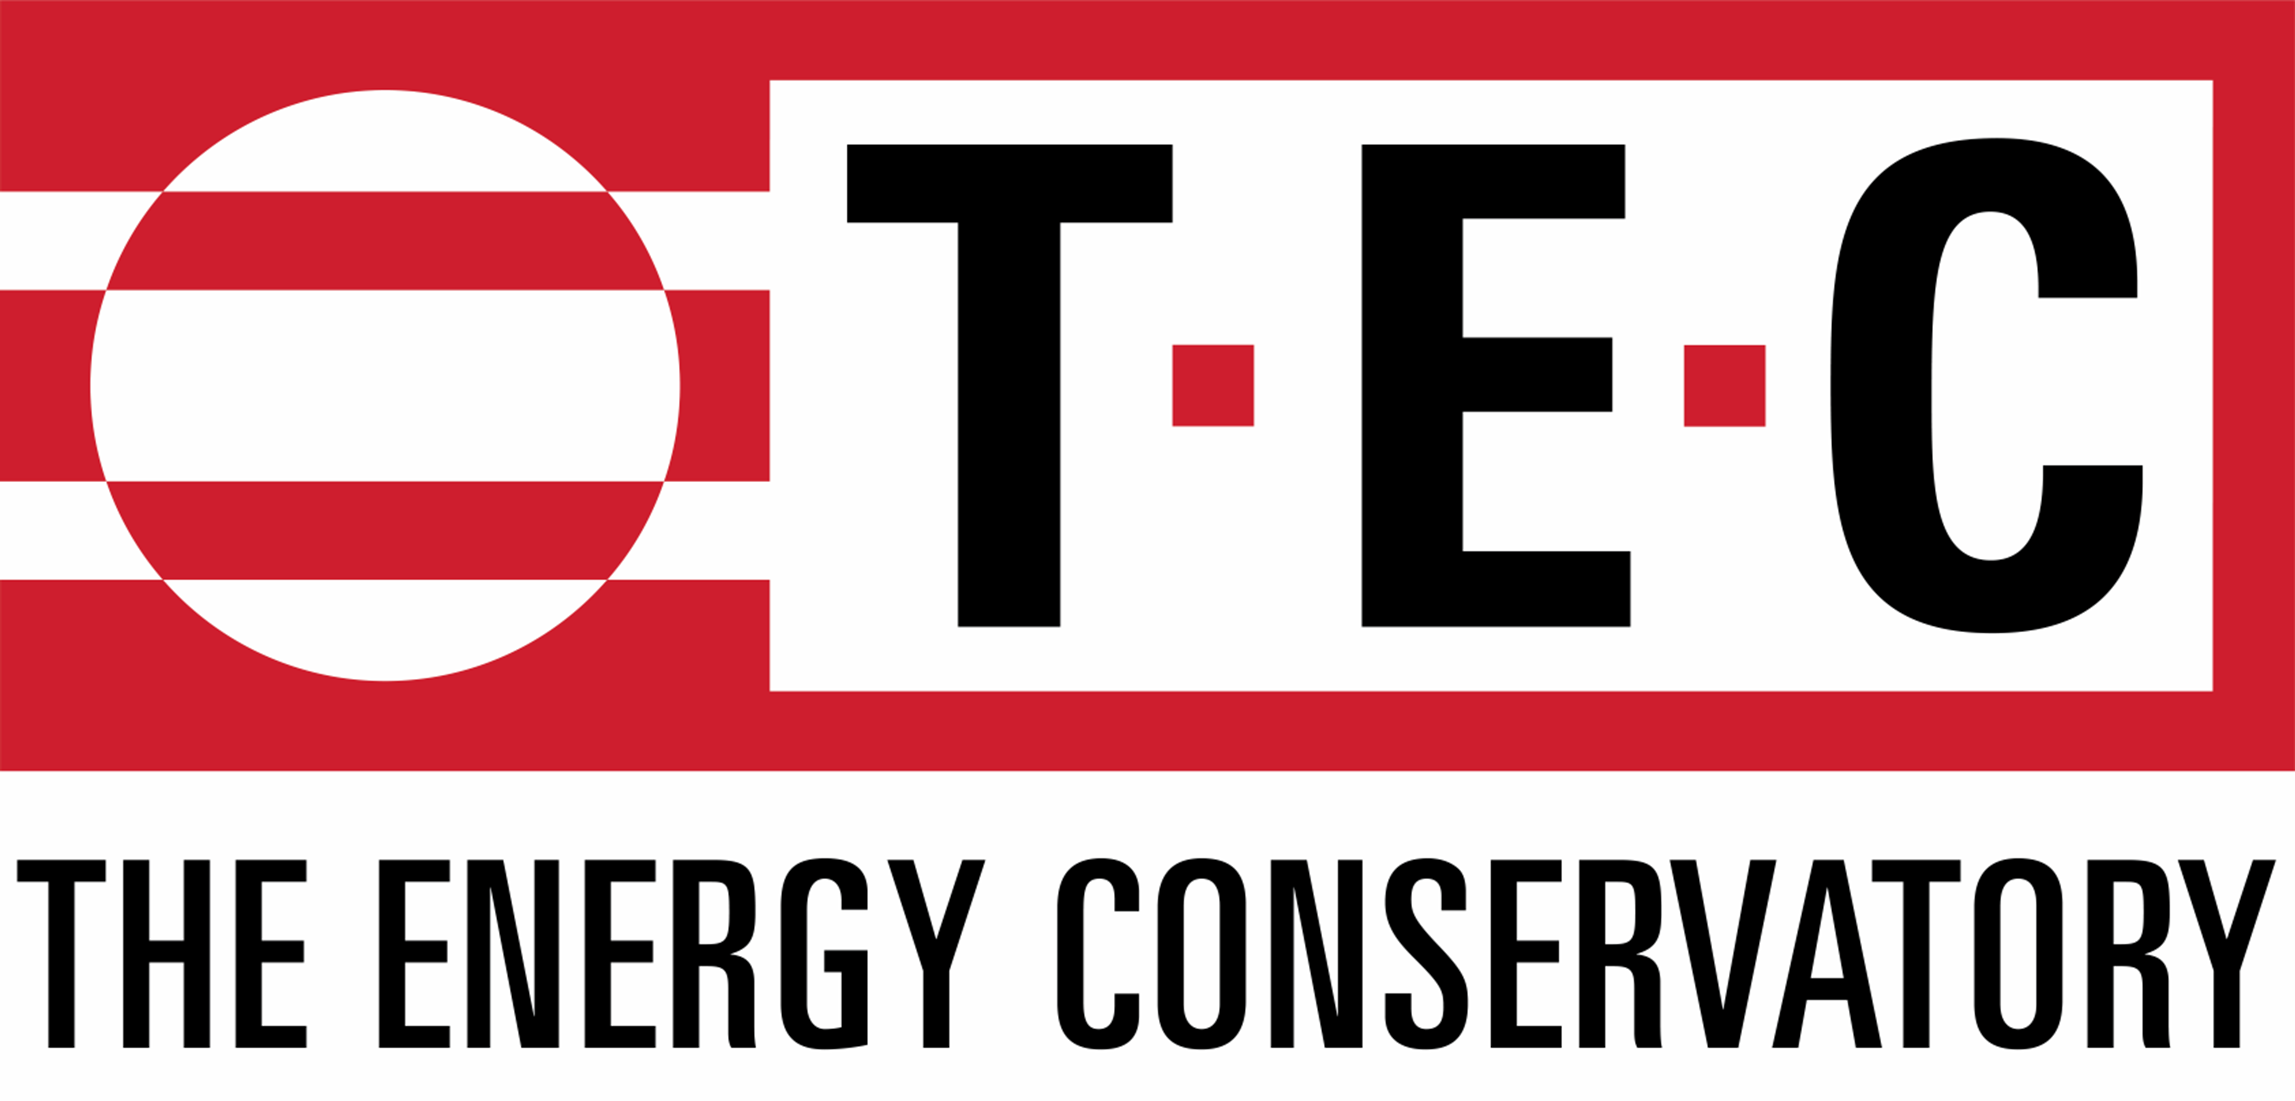 TEC - The Energy Conservatory